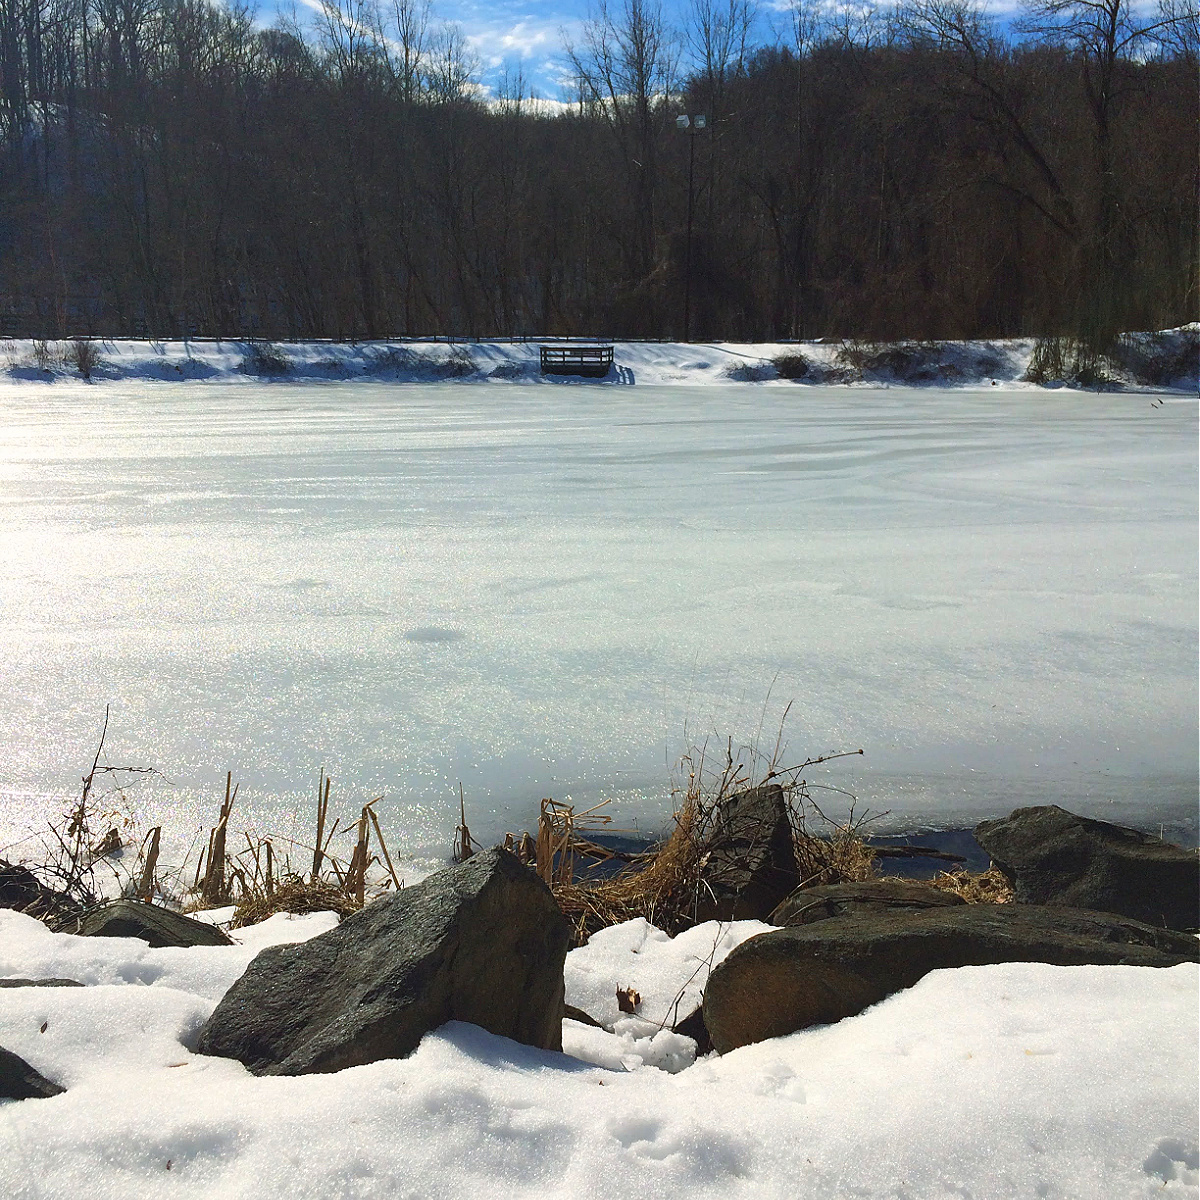 patapsco valley state park lost lake in winter